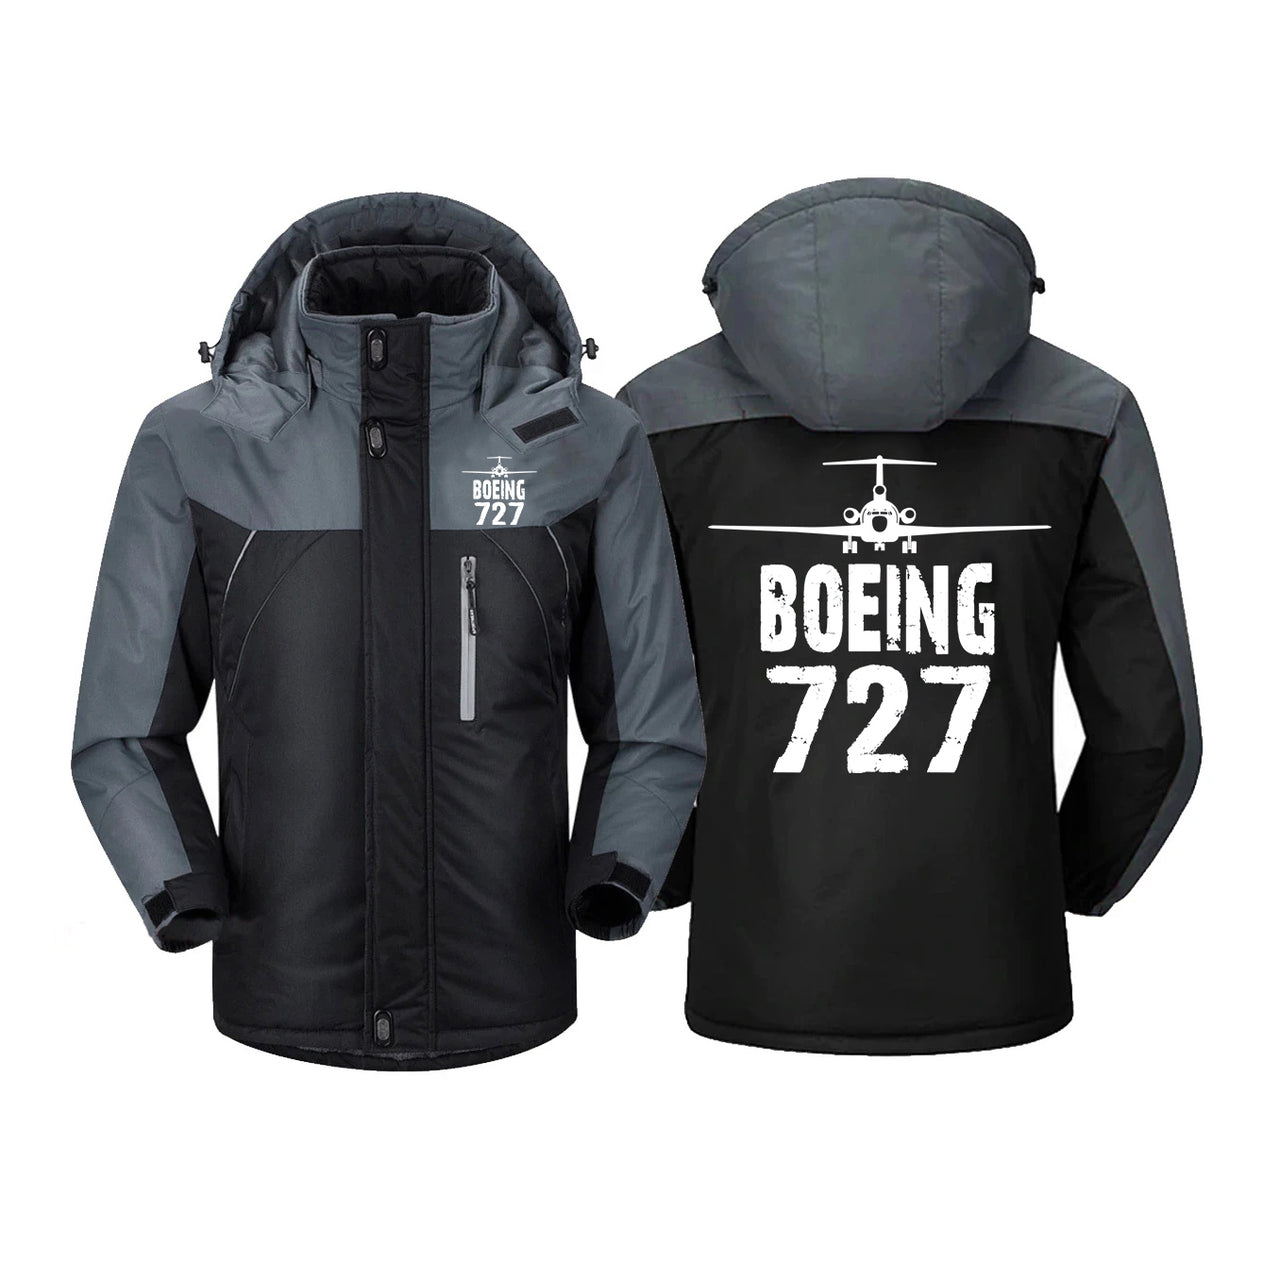 Boeing 727 & Plane Designed Thick Winter Jackets